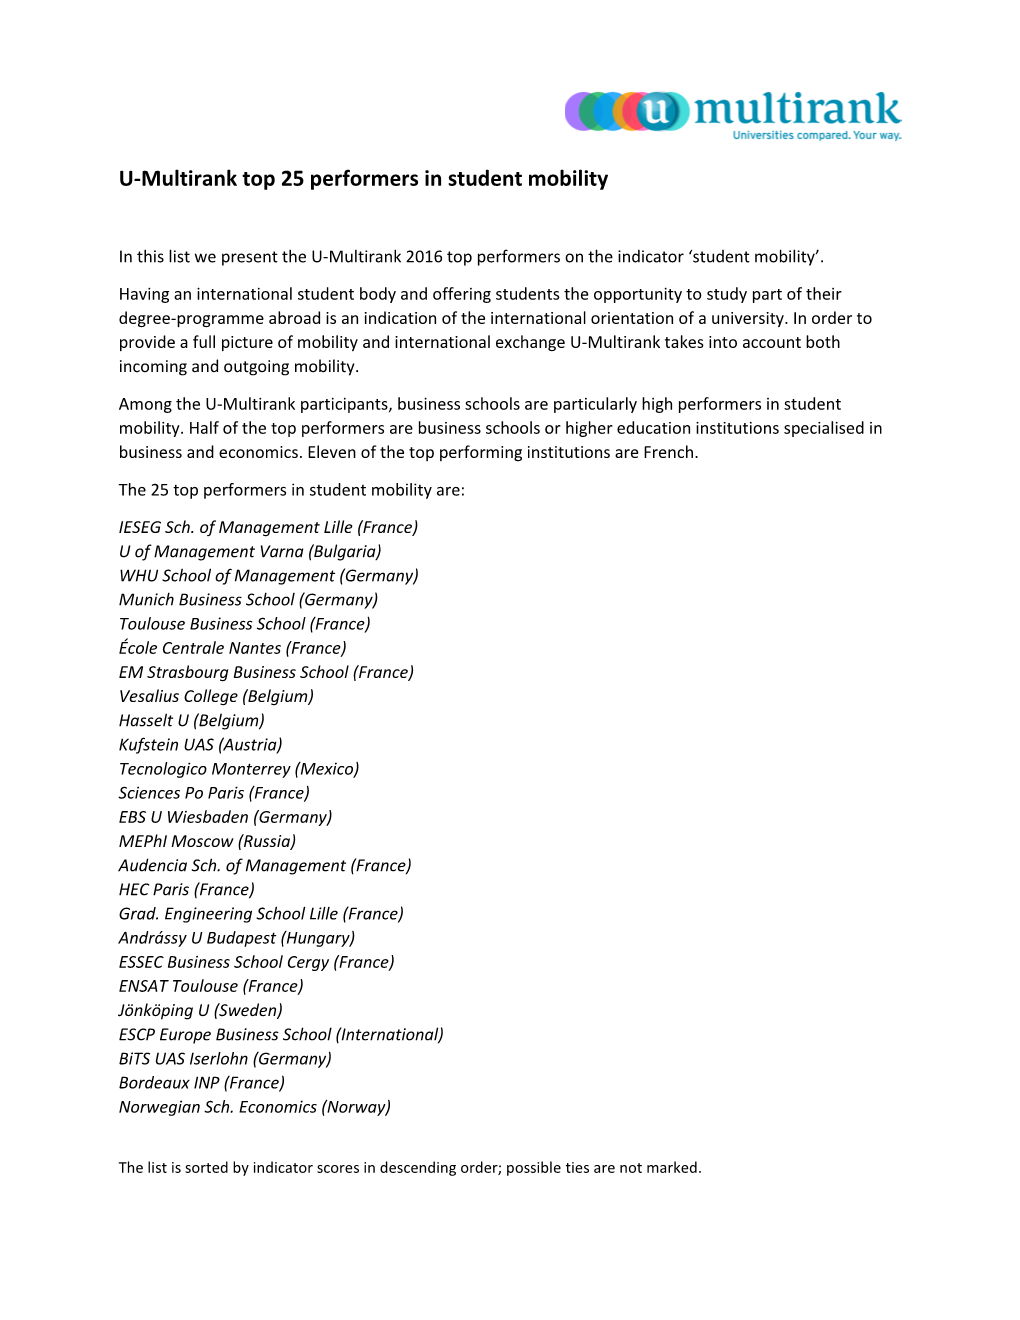 U-Multirank Top 25 Performers in Student Mobility